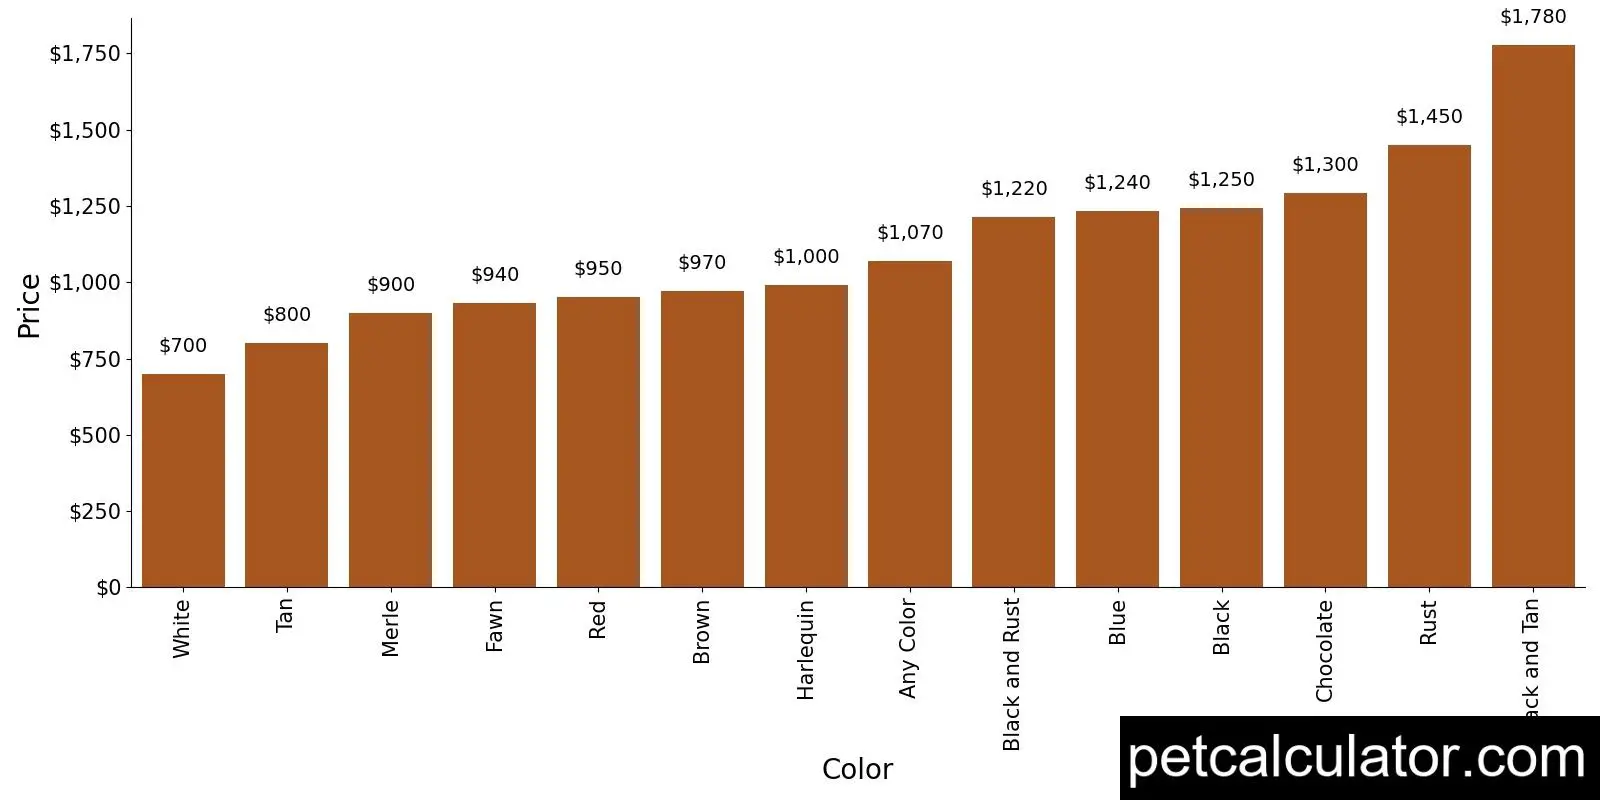 Price of Miniature Pinscher by Color 